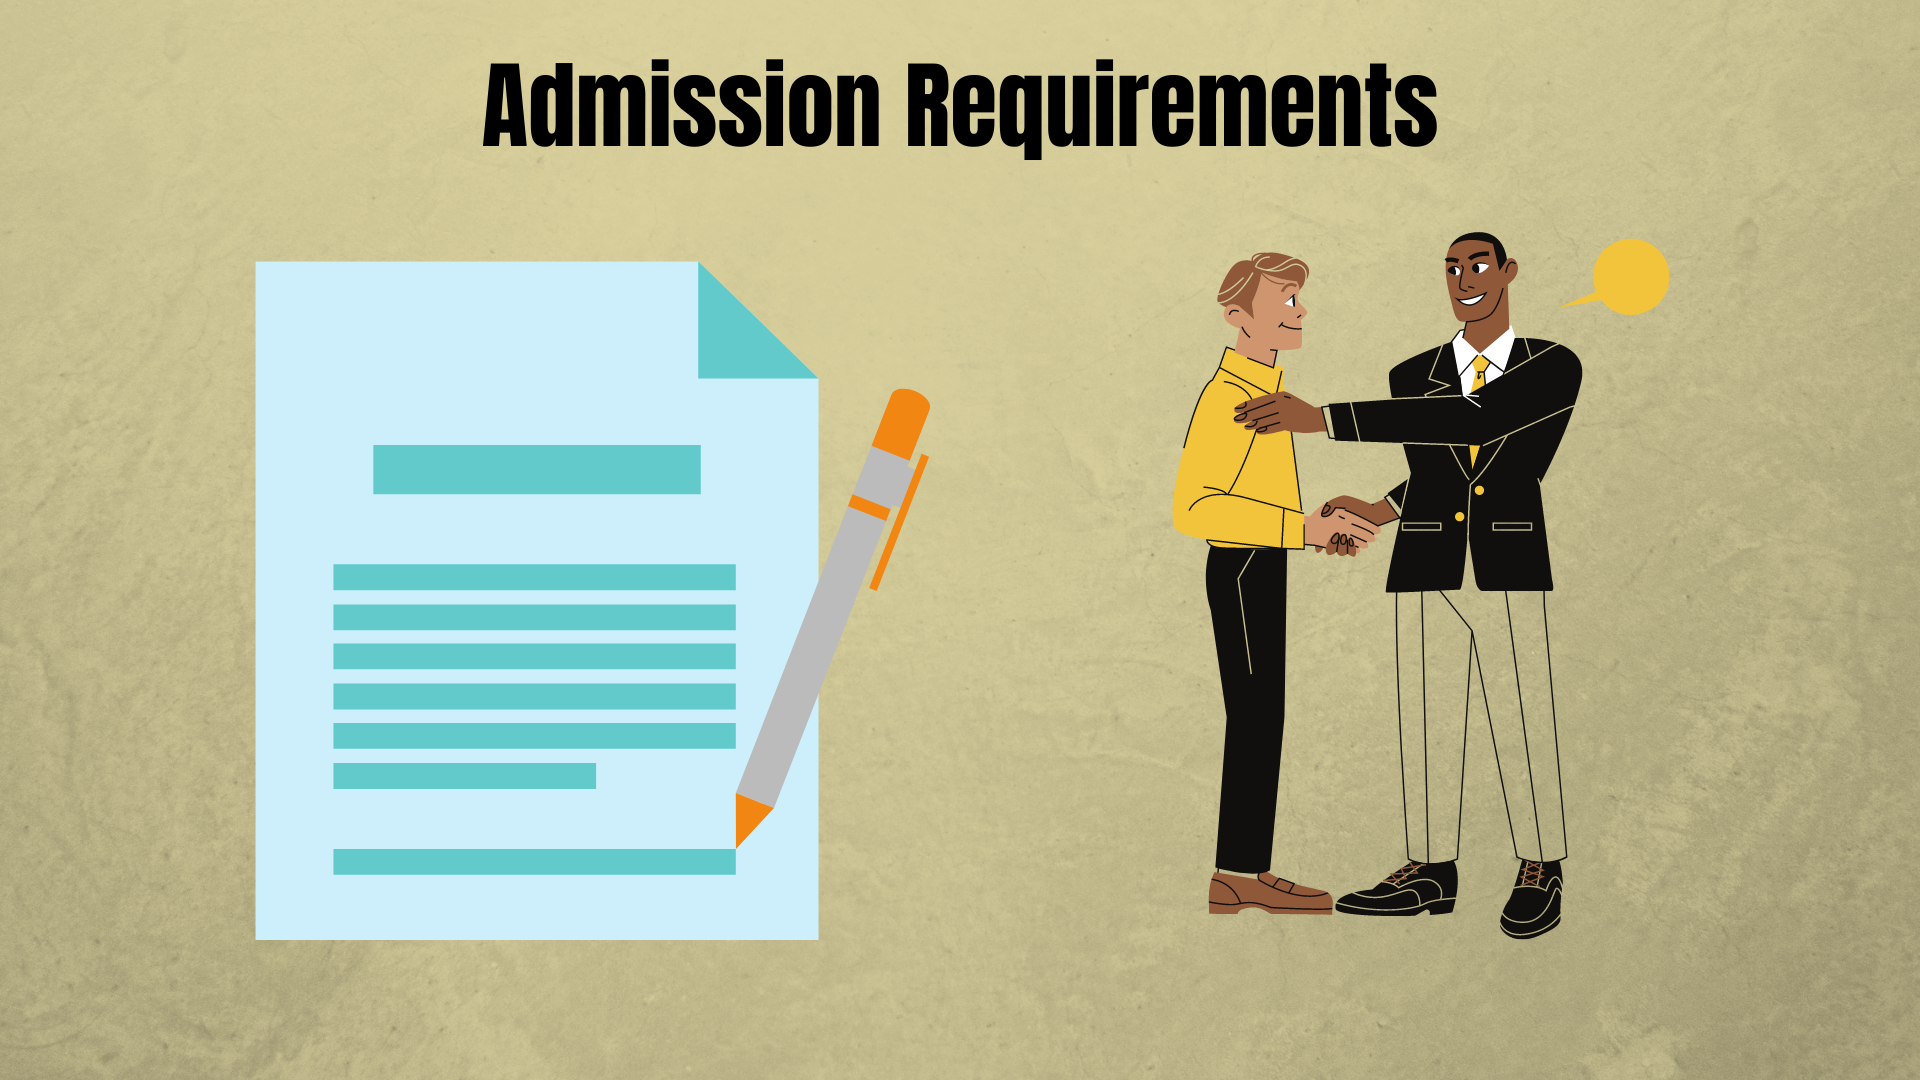 Admission Requirements for German Universities